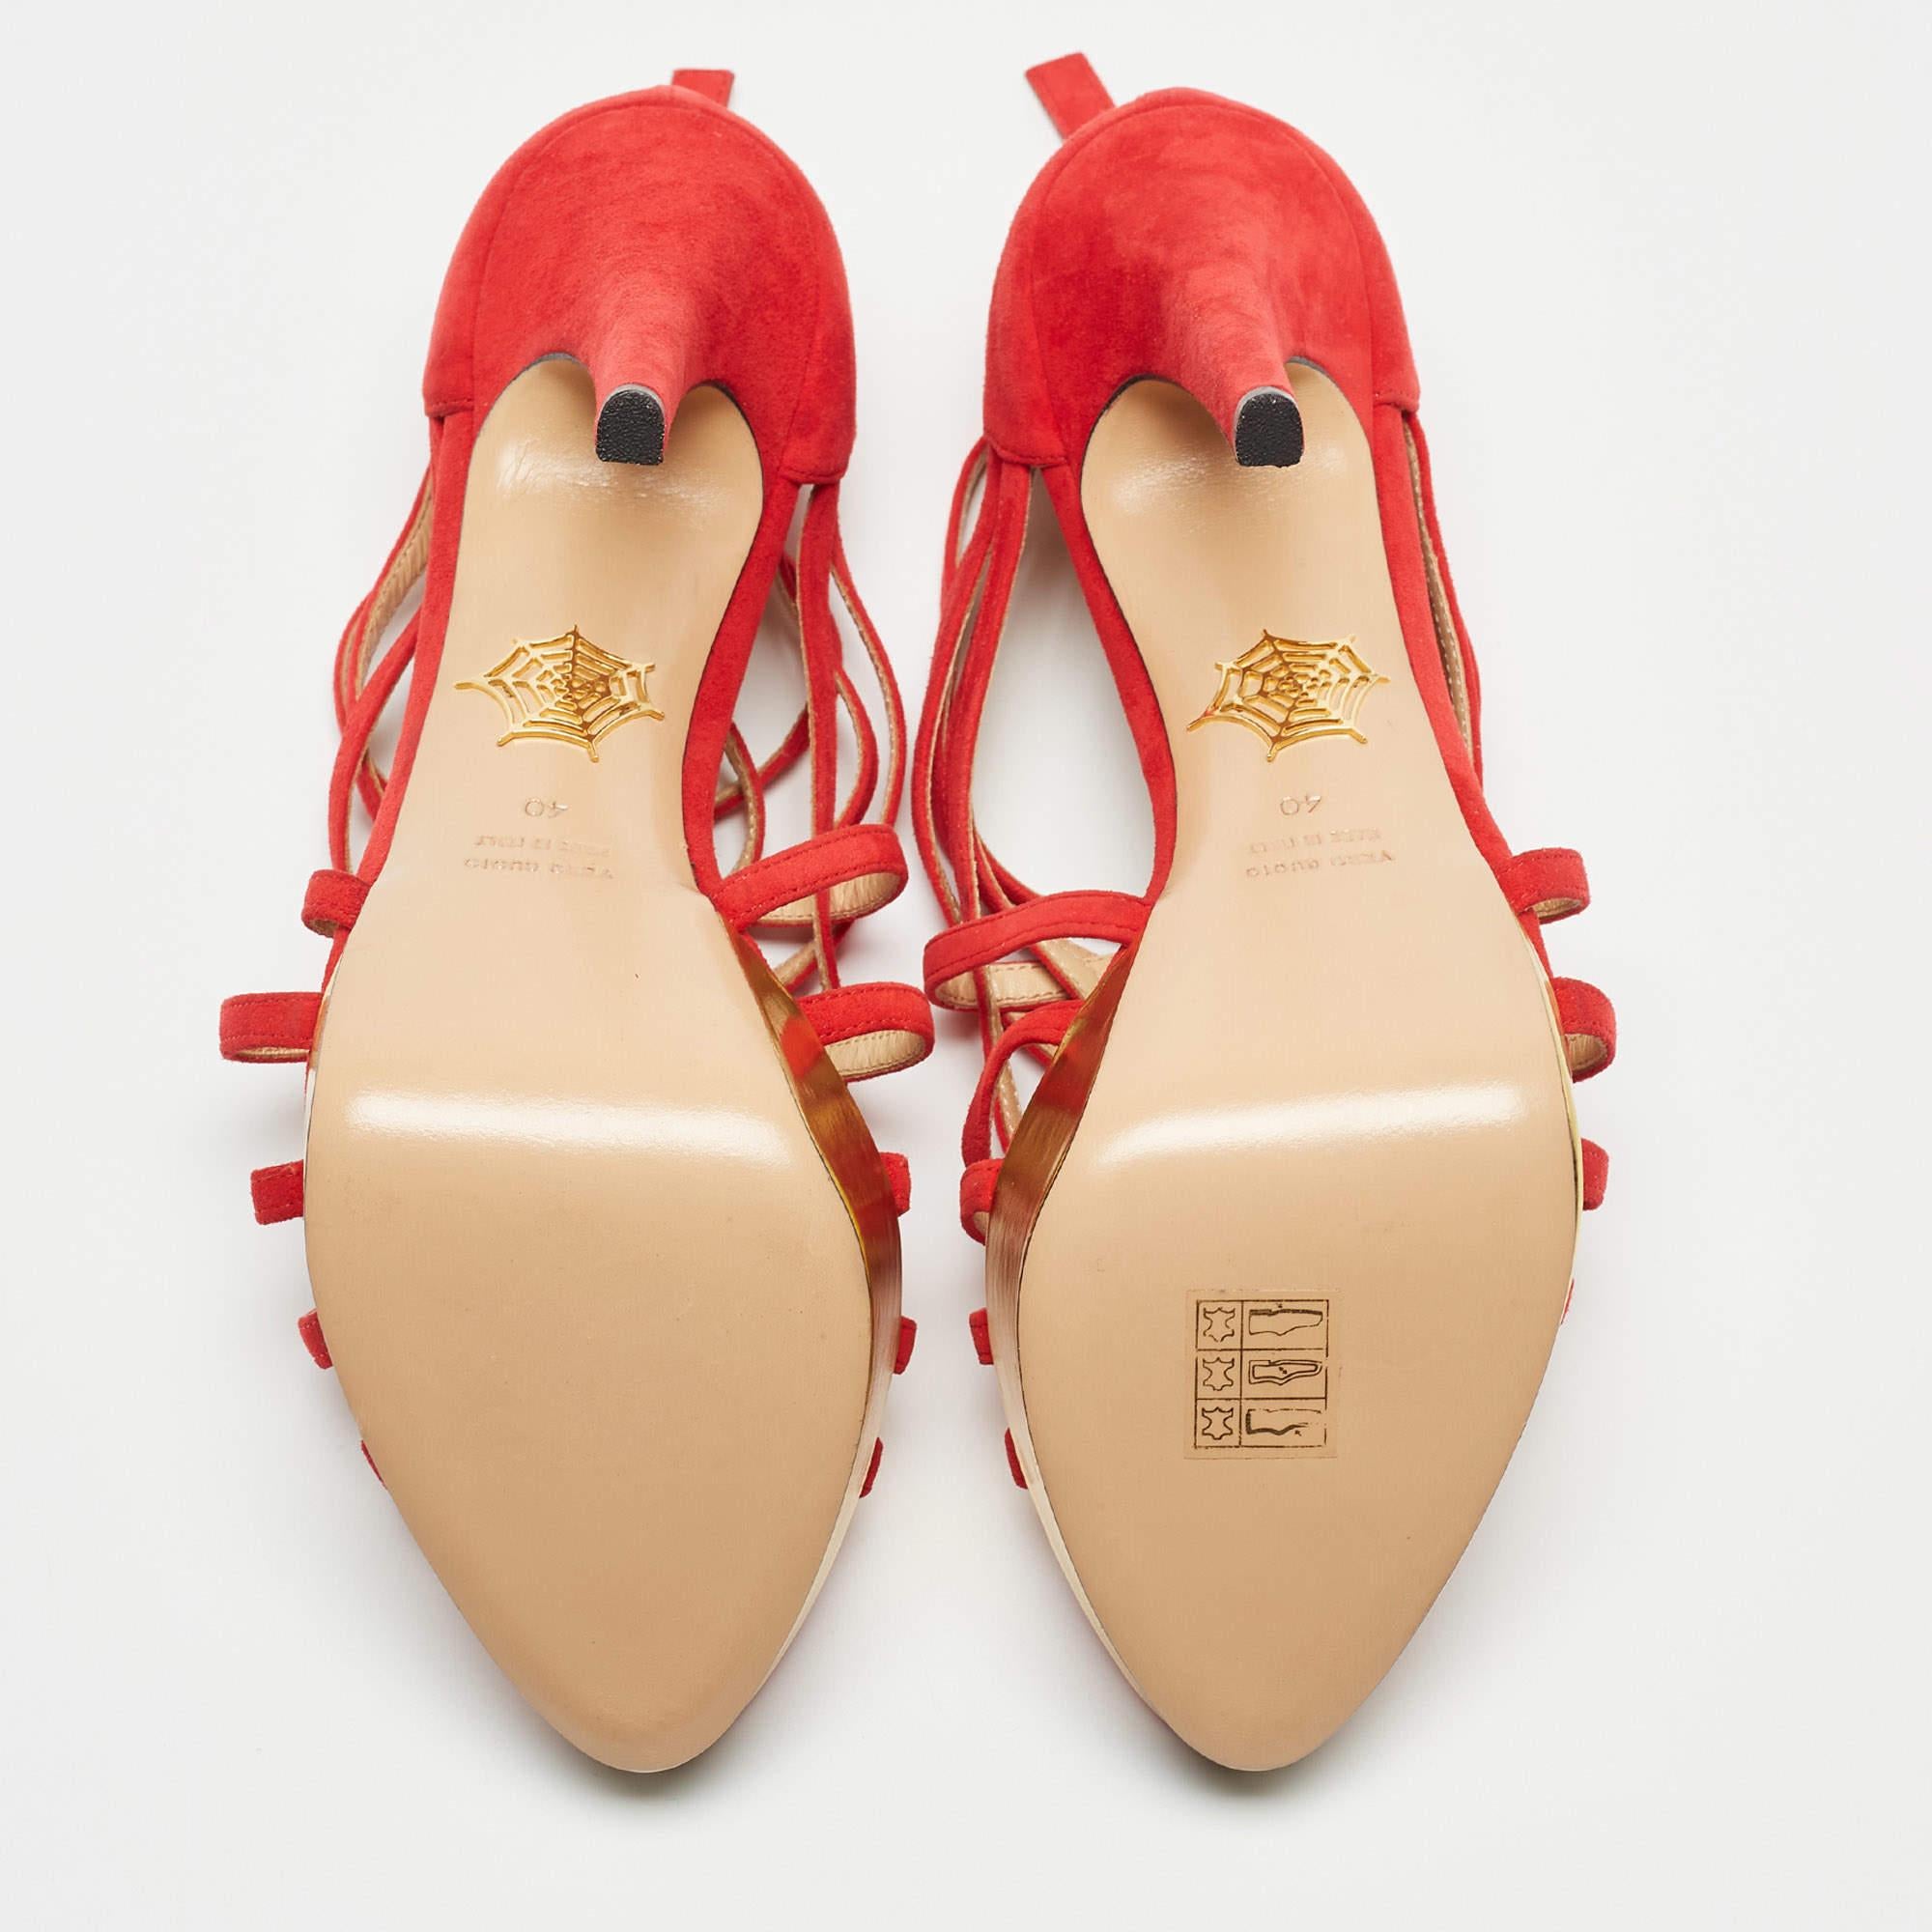 Charlotte Olympia Red Suede Strappy Platform Sandals Size 40 For Sale 5